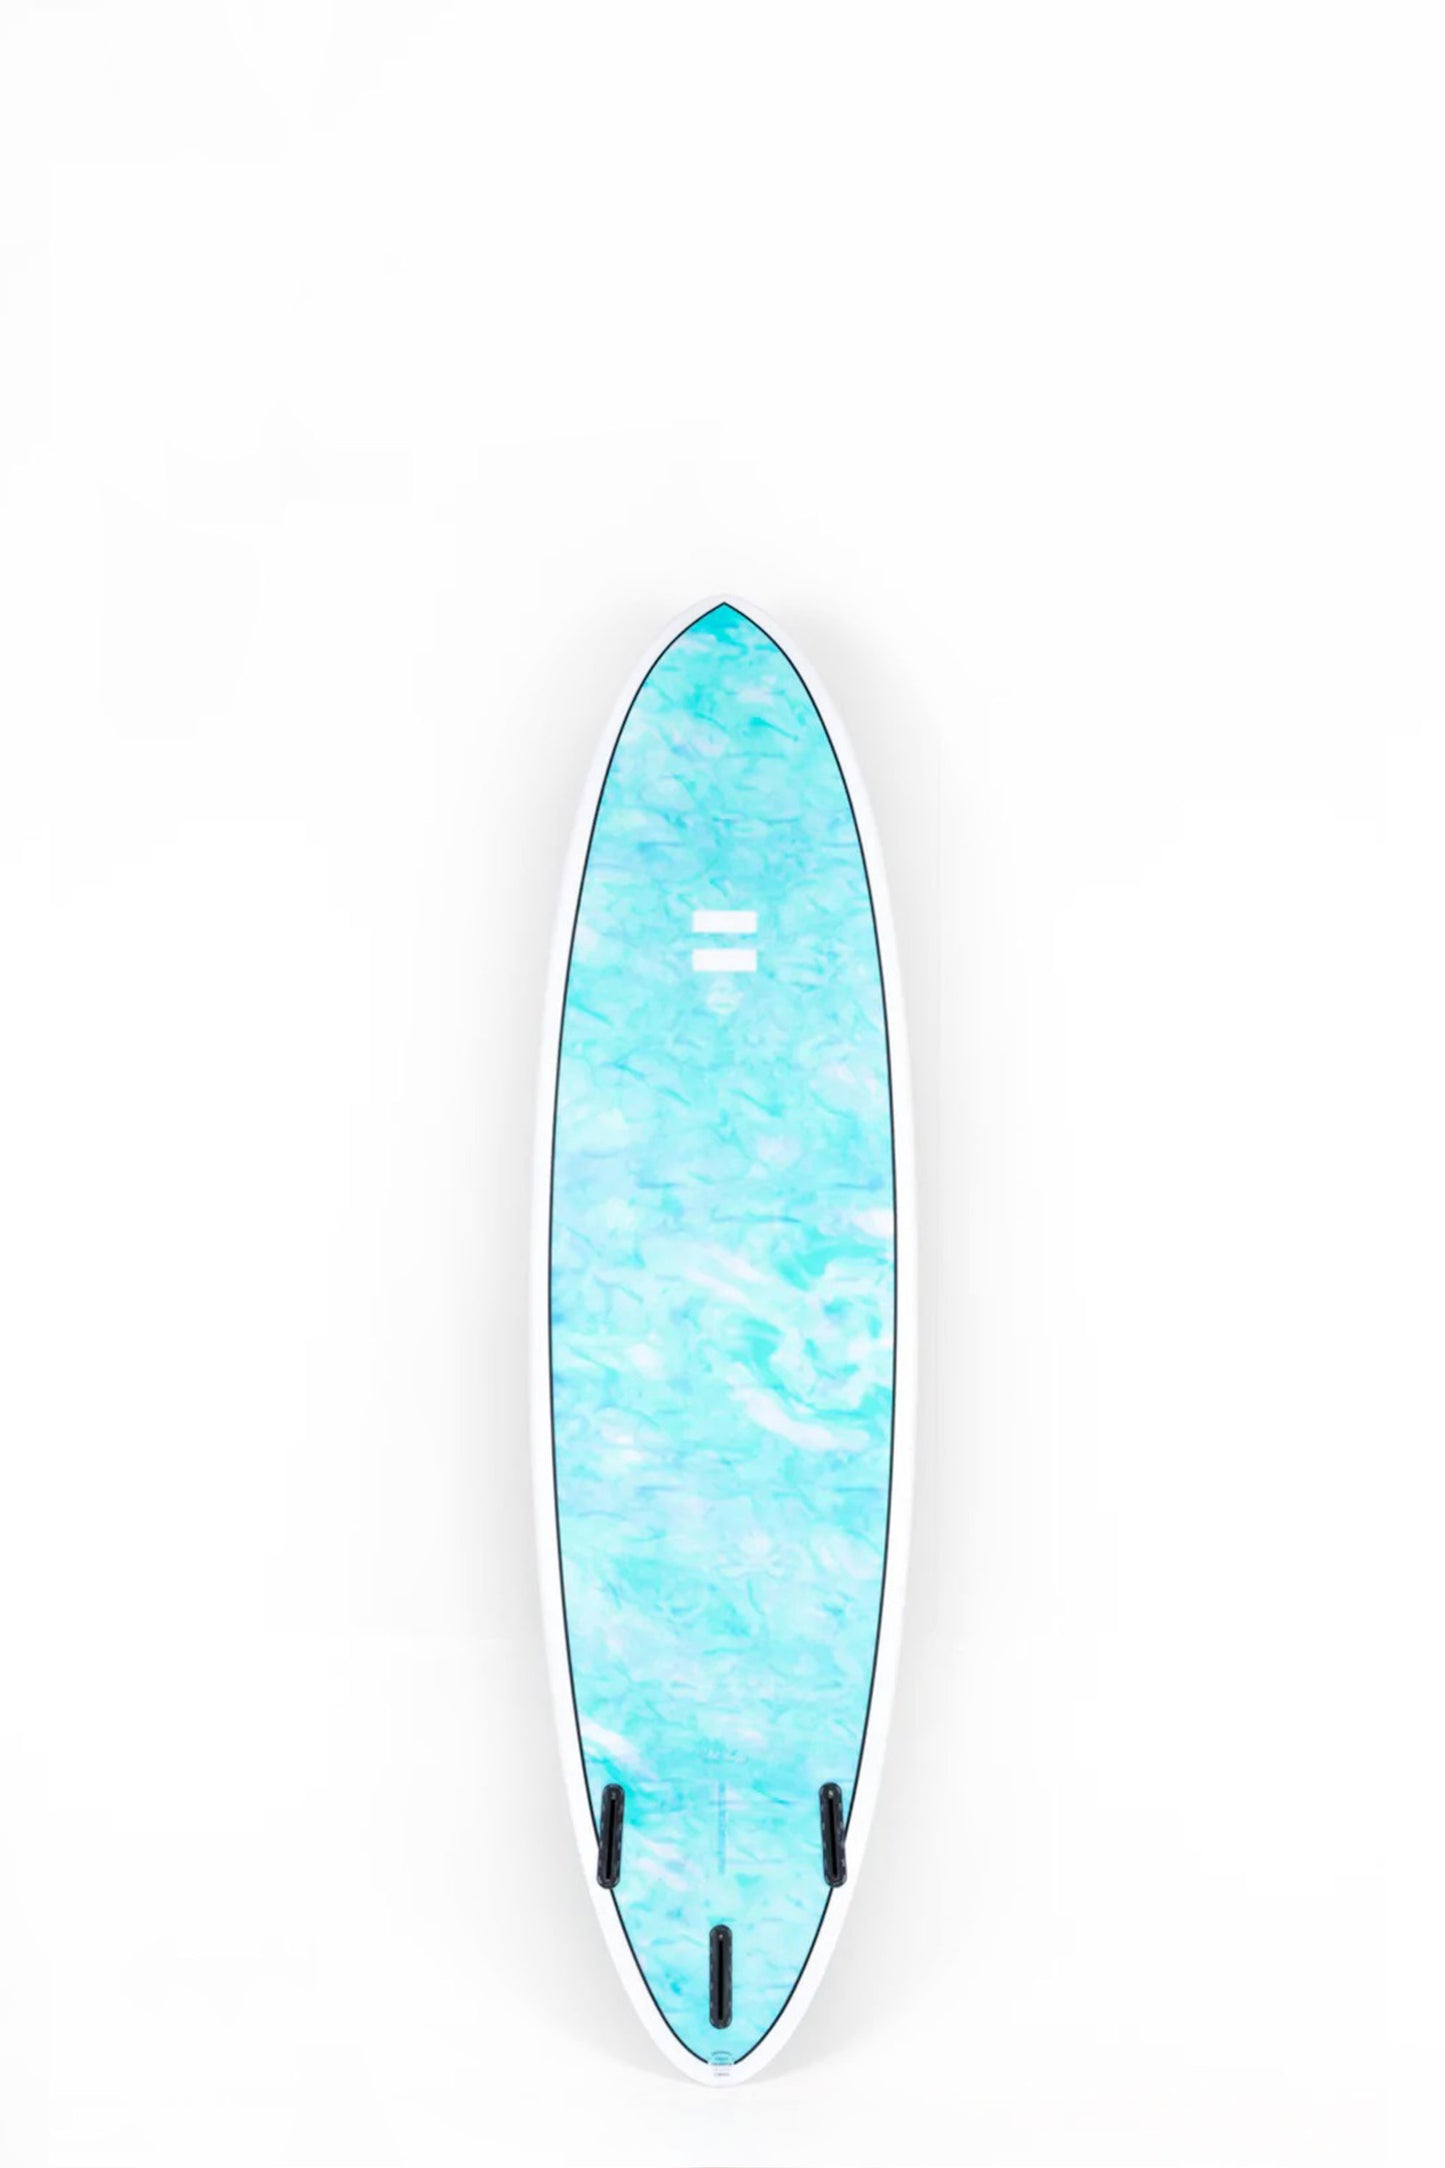 Indio Surfboards - THE EGG Swirl Effect Blue Mint - 6´8 x 21 1/2 x 